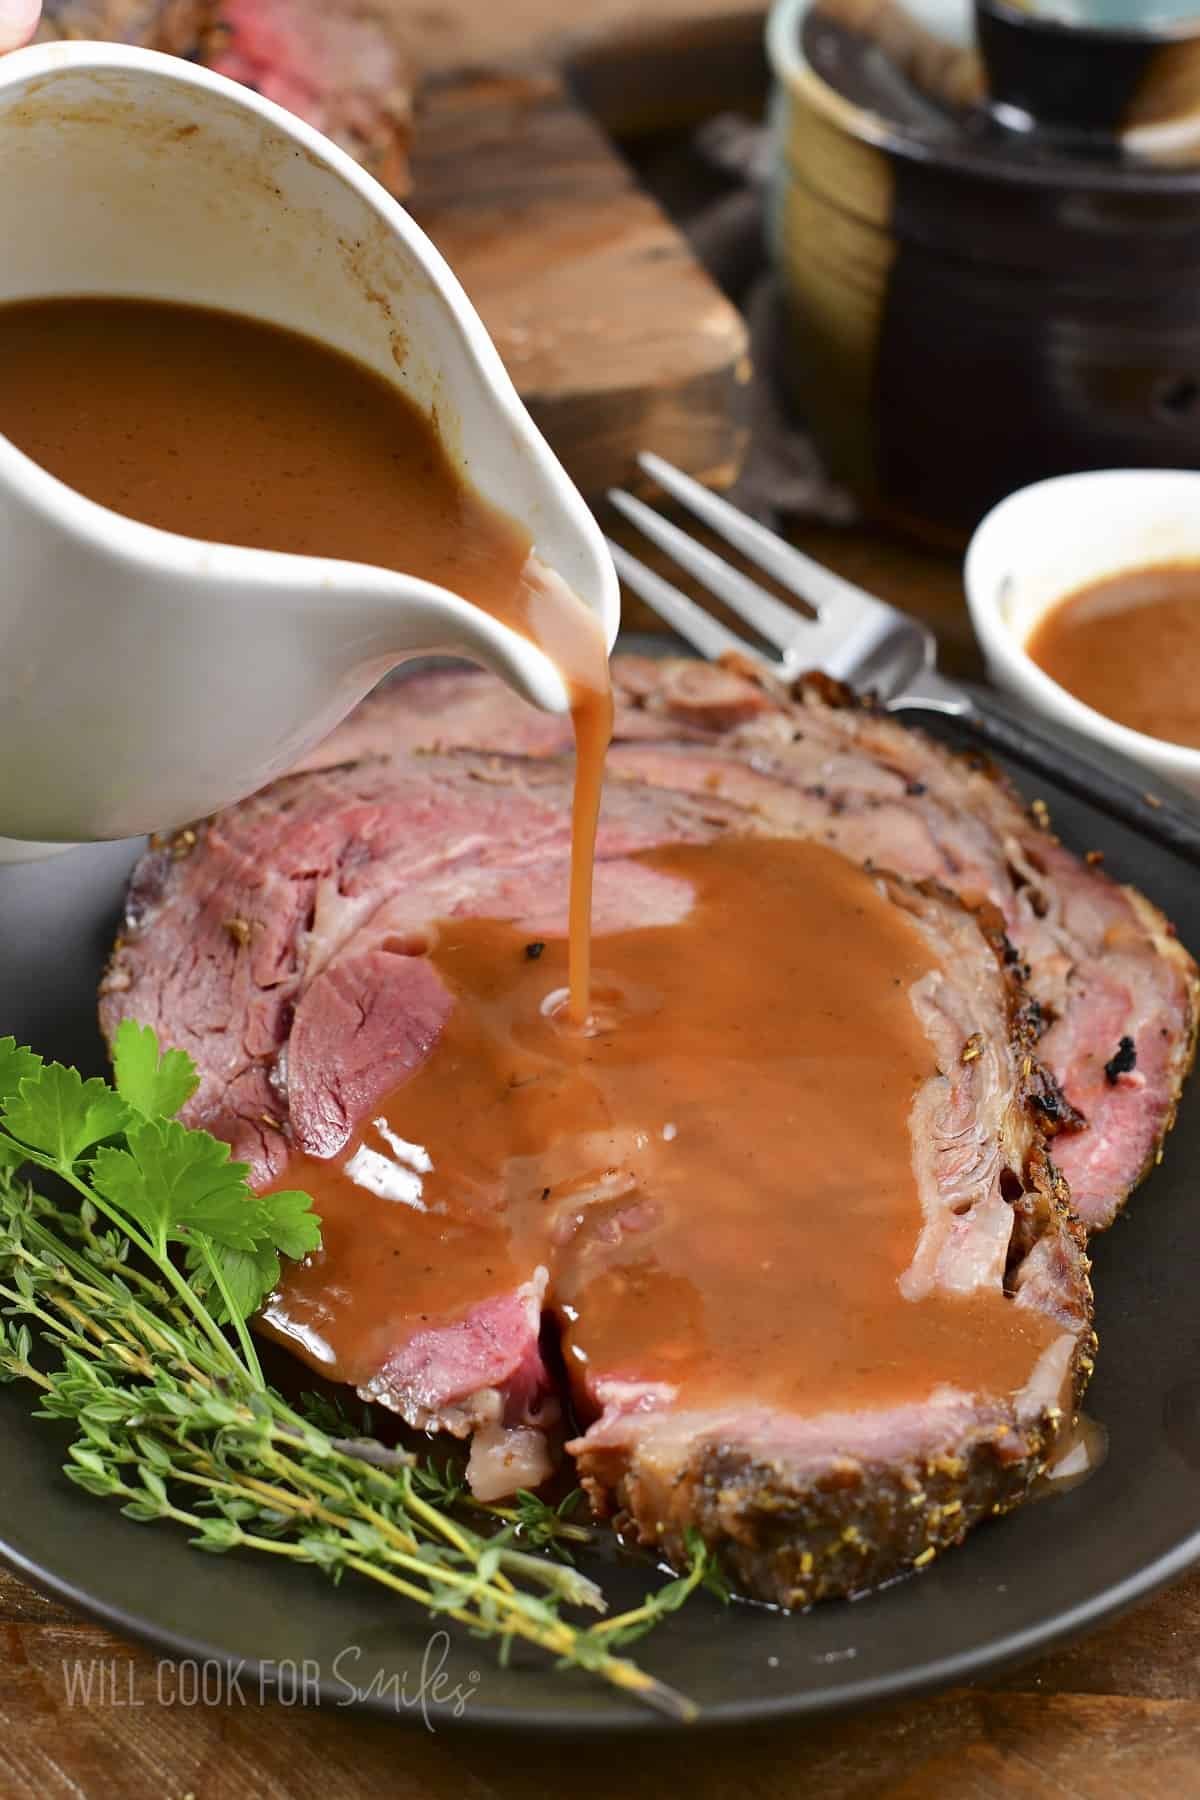 https://www.willcookforsmiles.com/wp-content/uploads/2022/12/Au-Jus-pouring-over-prime-rib.jpg